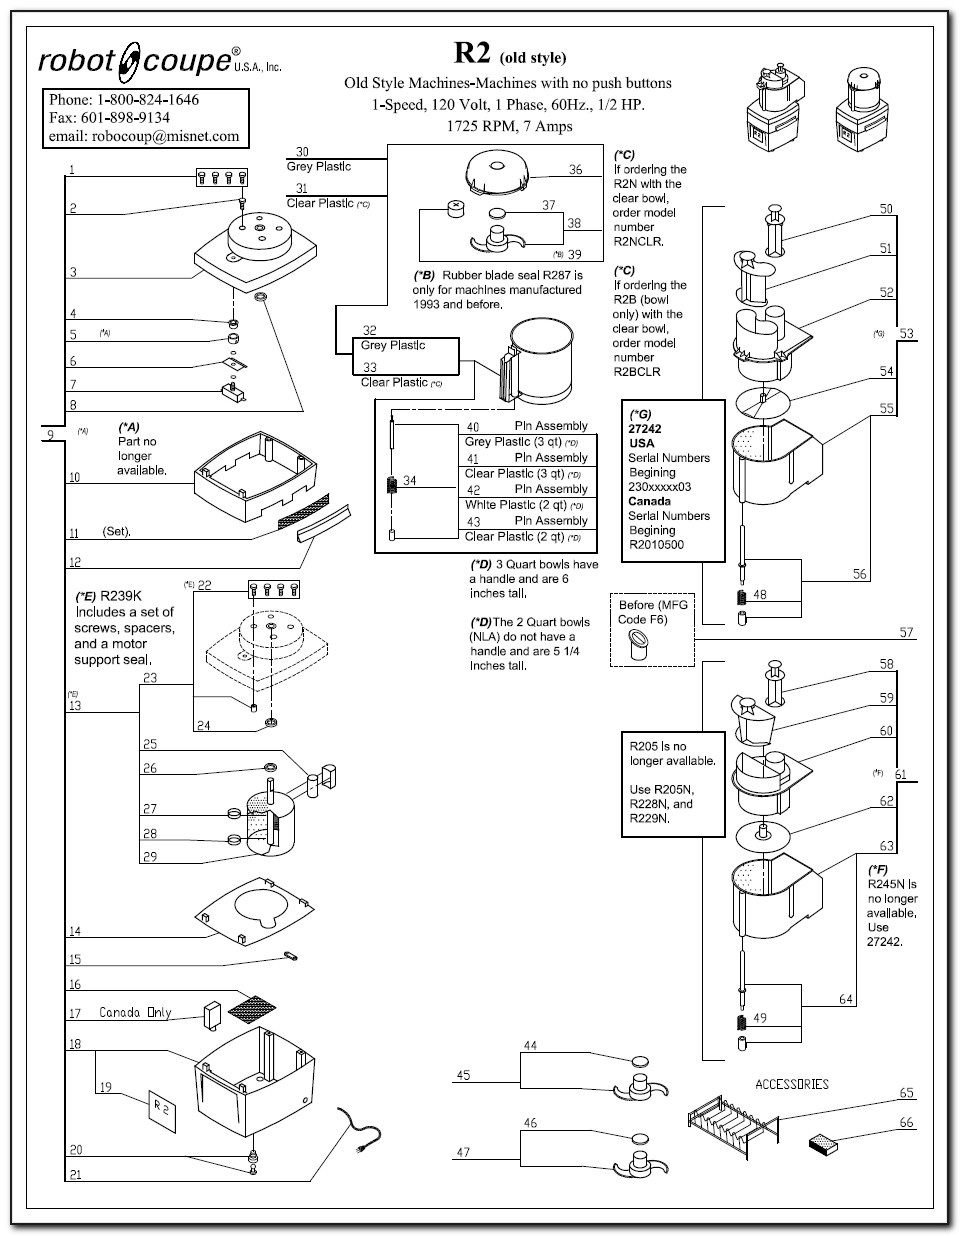 Robot Coupe R2 Wiring Diagram